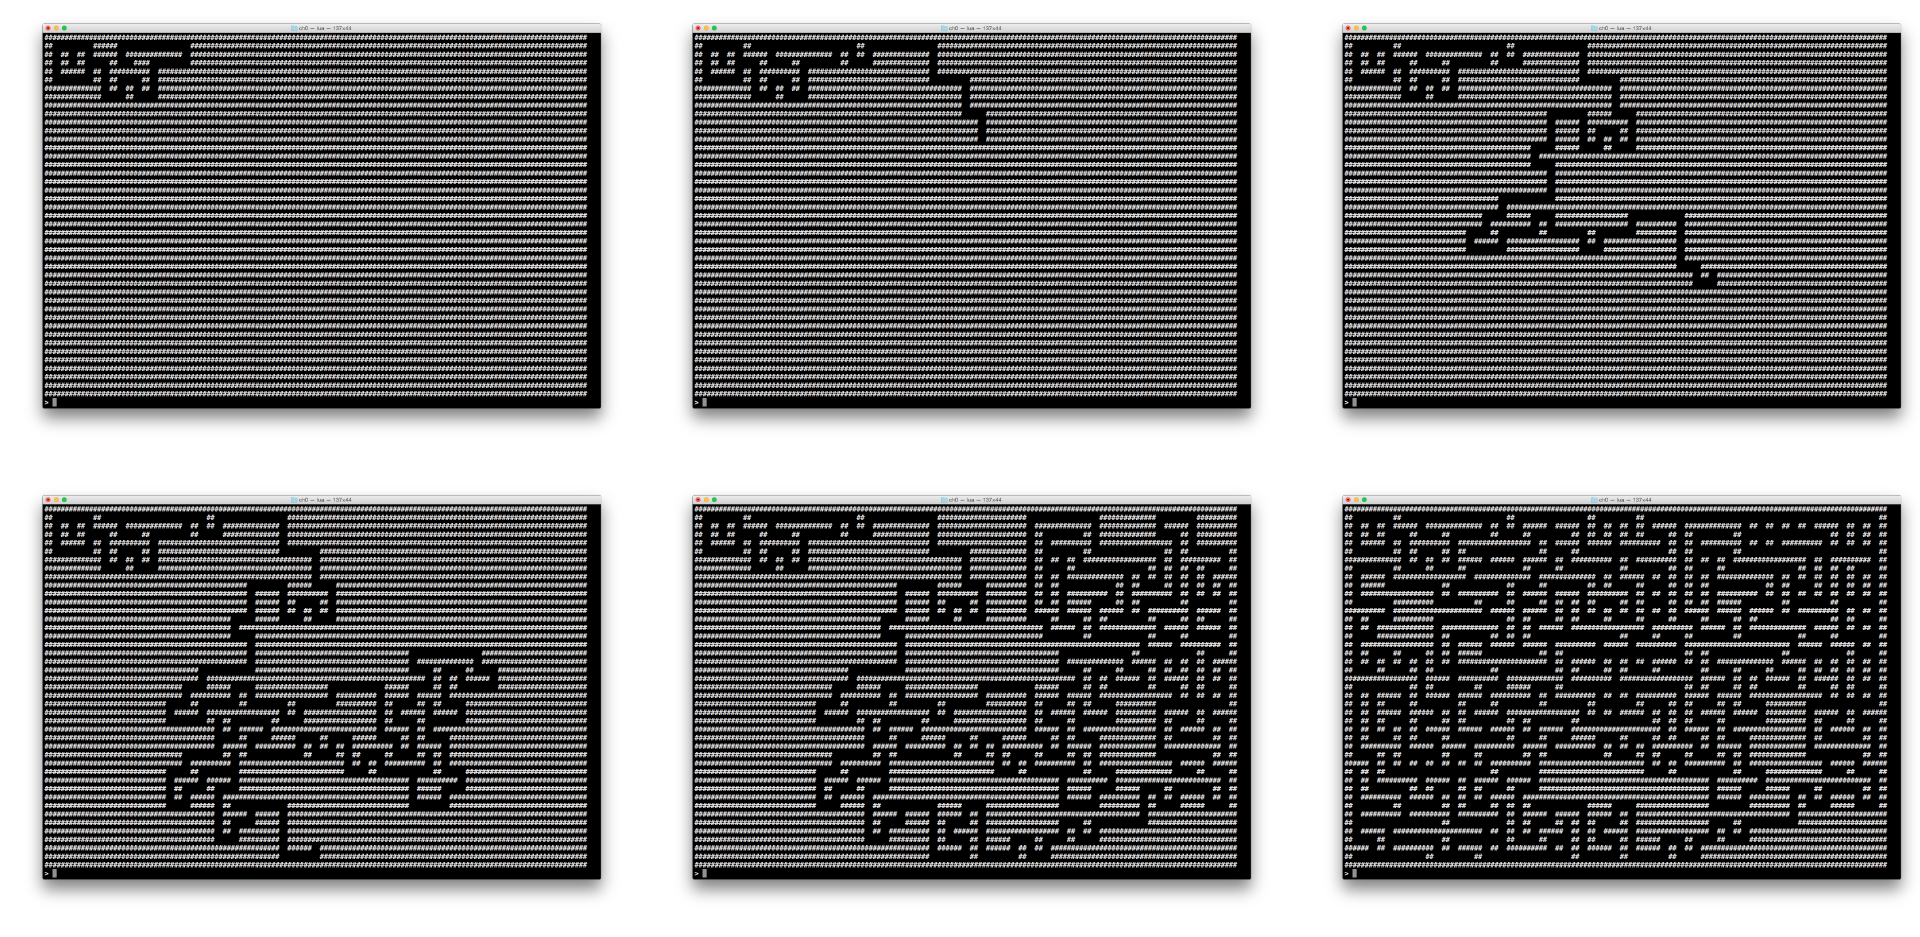 A time-lapse sequence of our maze generation. These images were created by using a modified version of the code in this chapter.